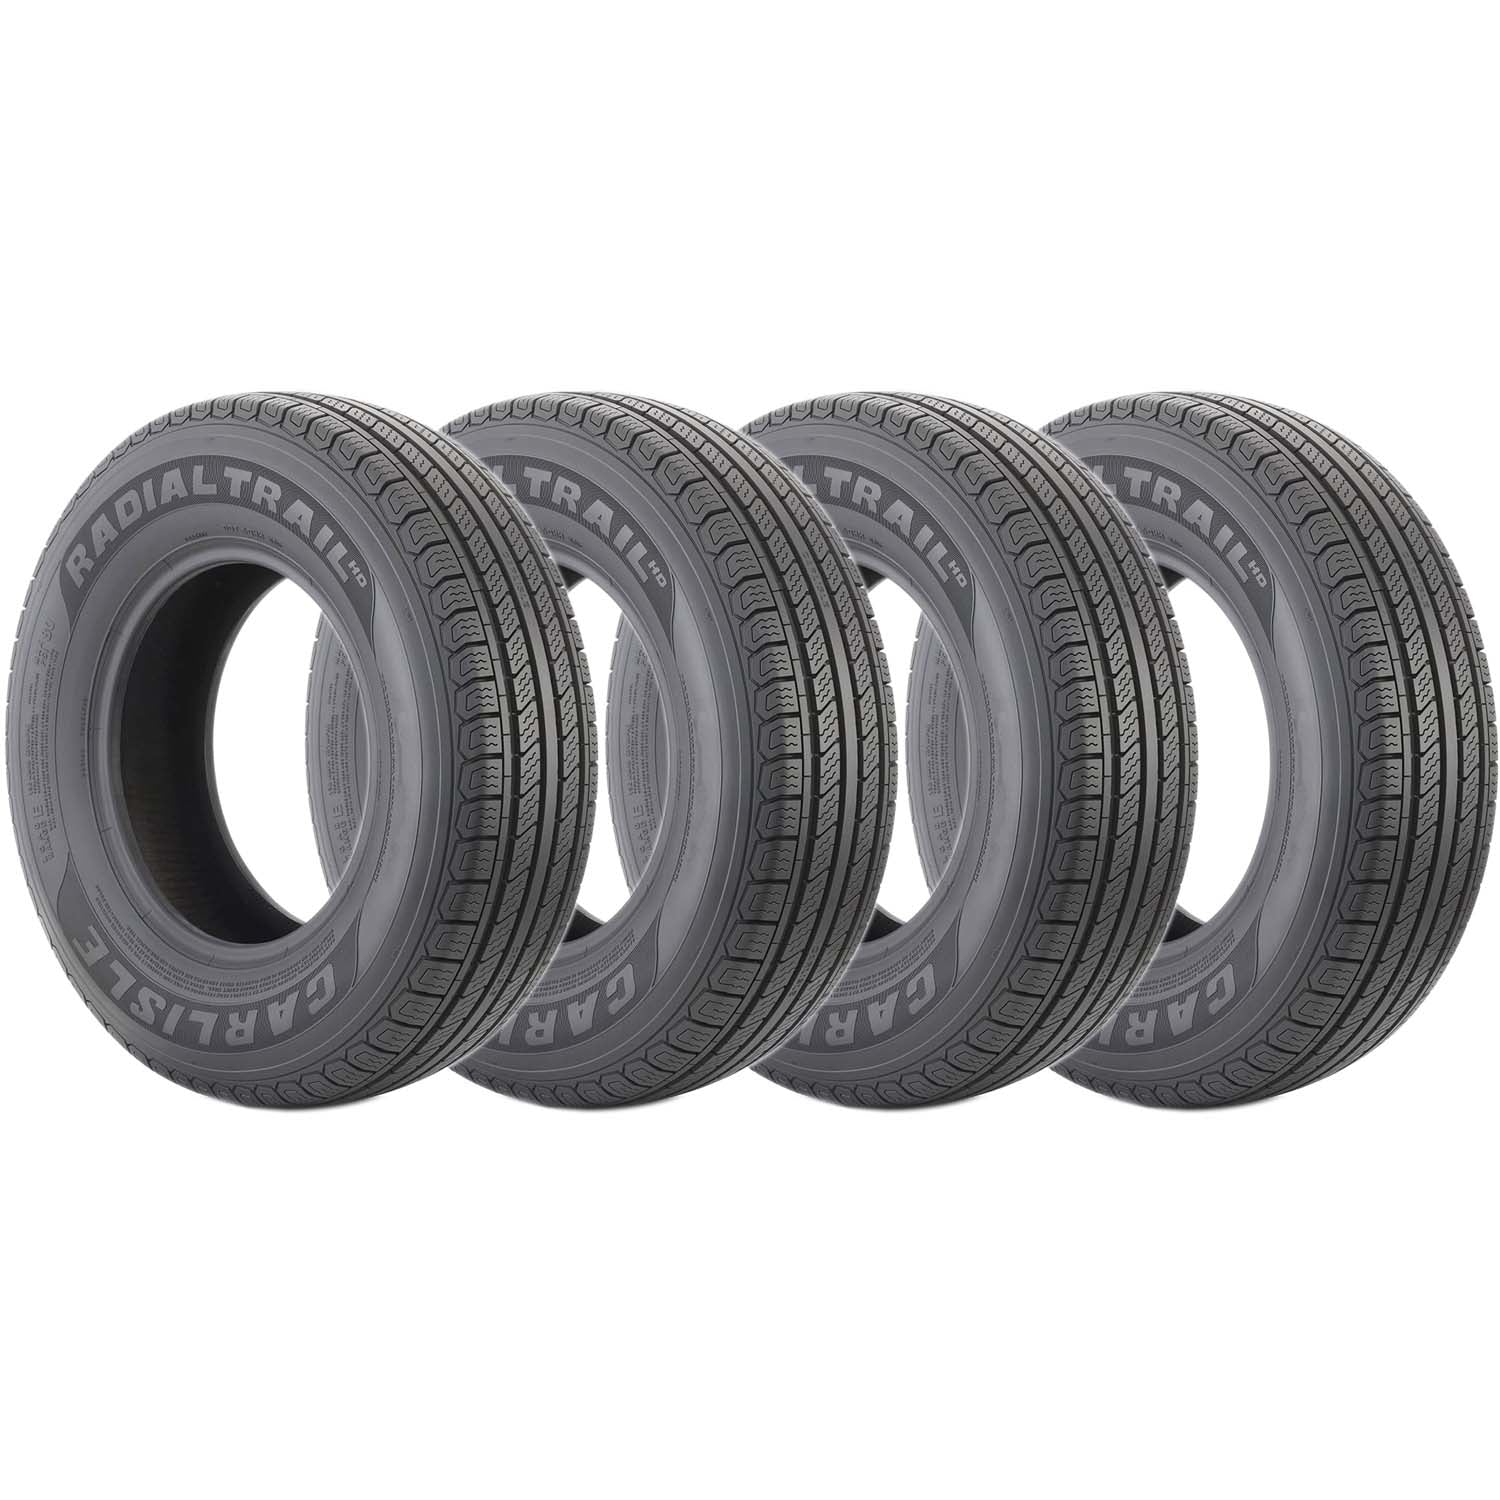 Carlisle Radial Trail HD Trailer Tire LRD 8ply ST205/75R15 Pack of 4